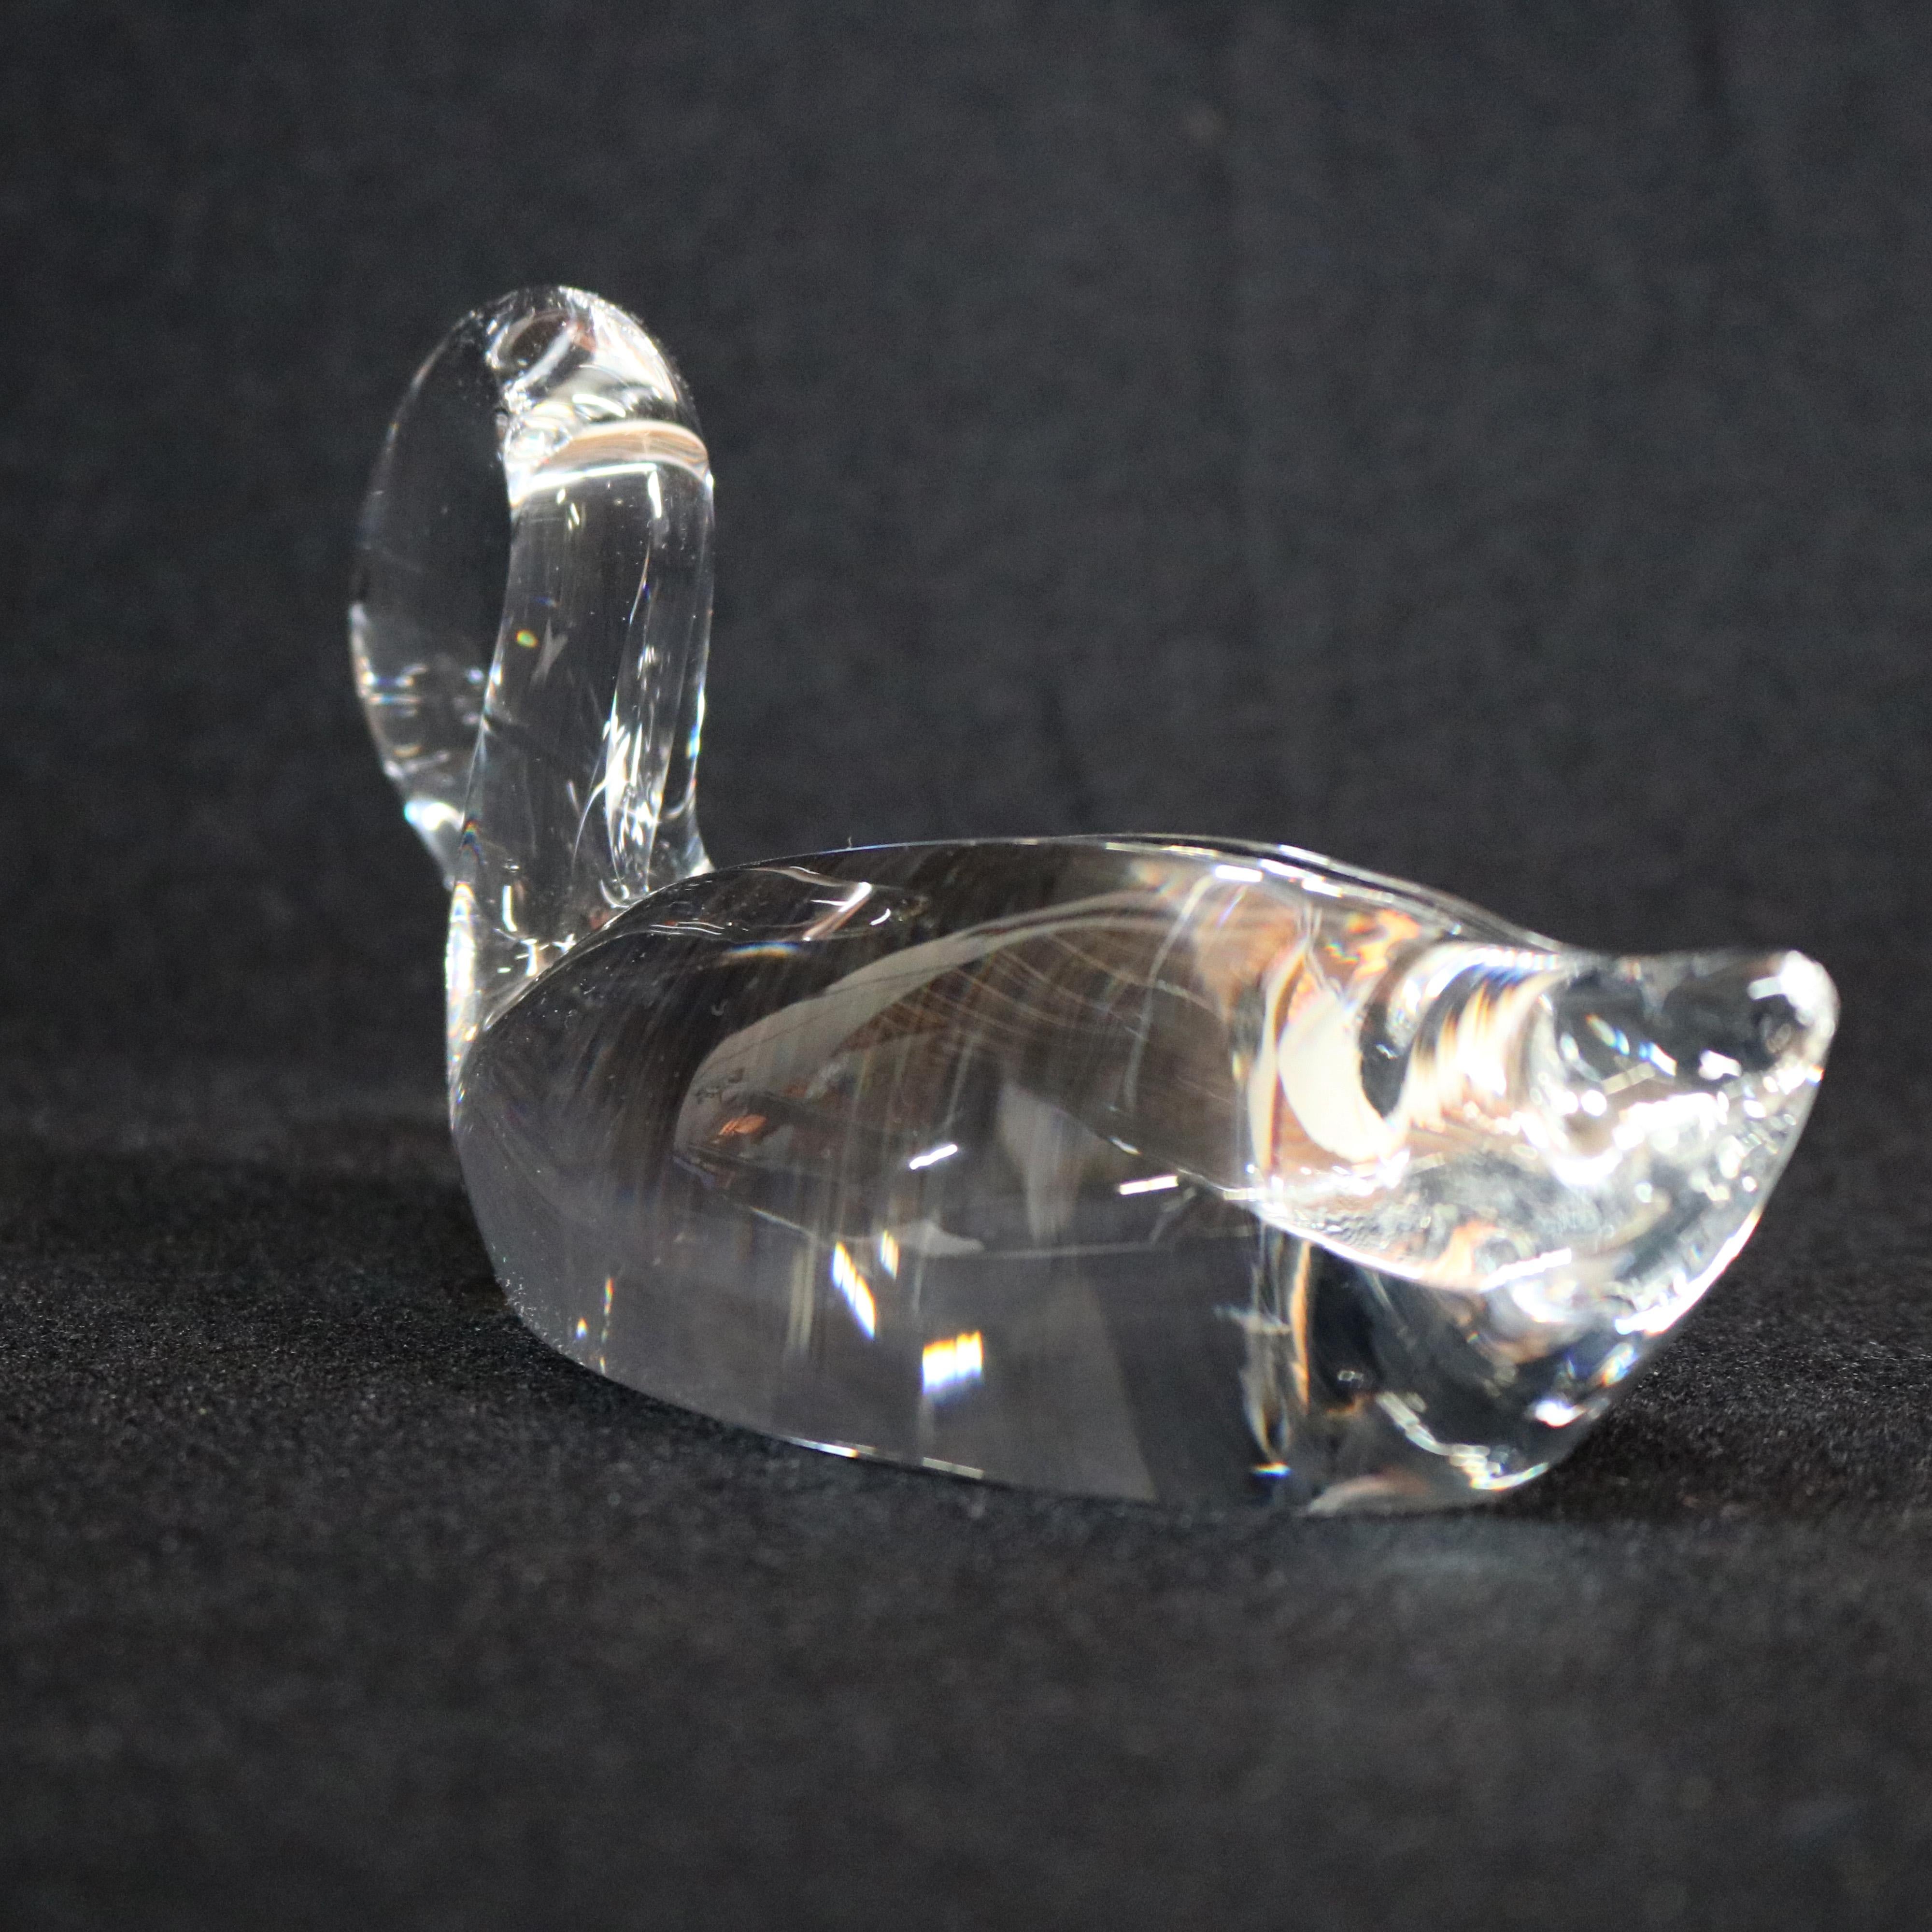 American Steuben Crystal Sculpture Paperweight of Swan by Lloyd Atkins, Signed